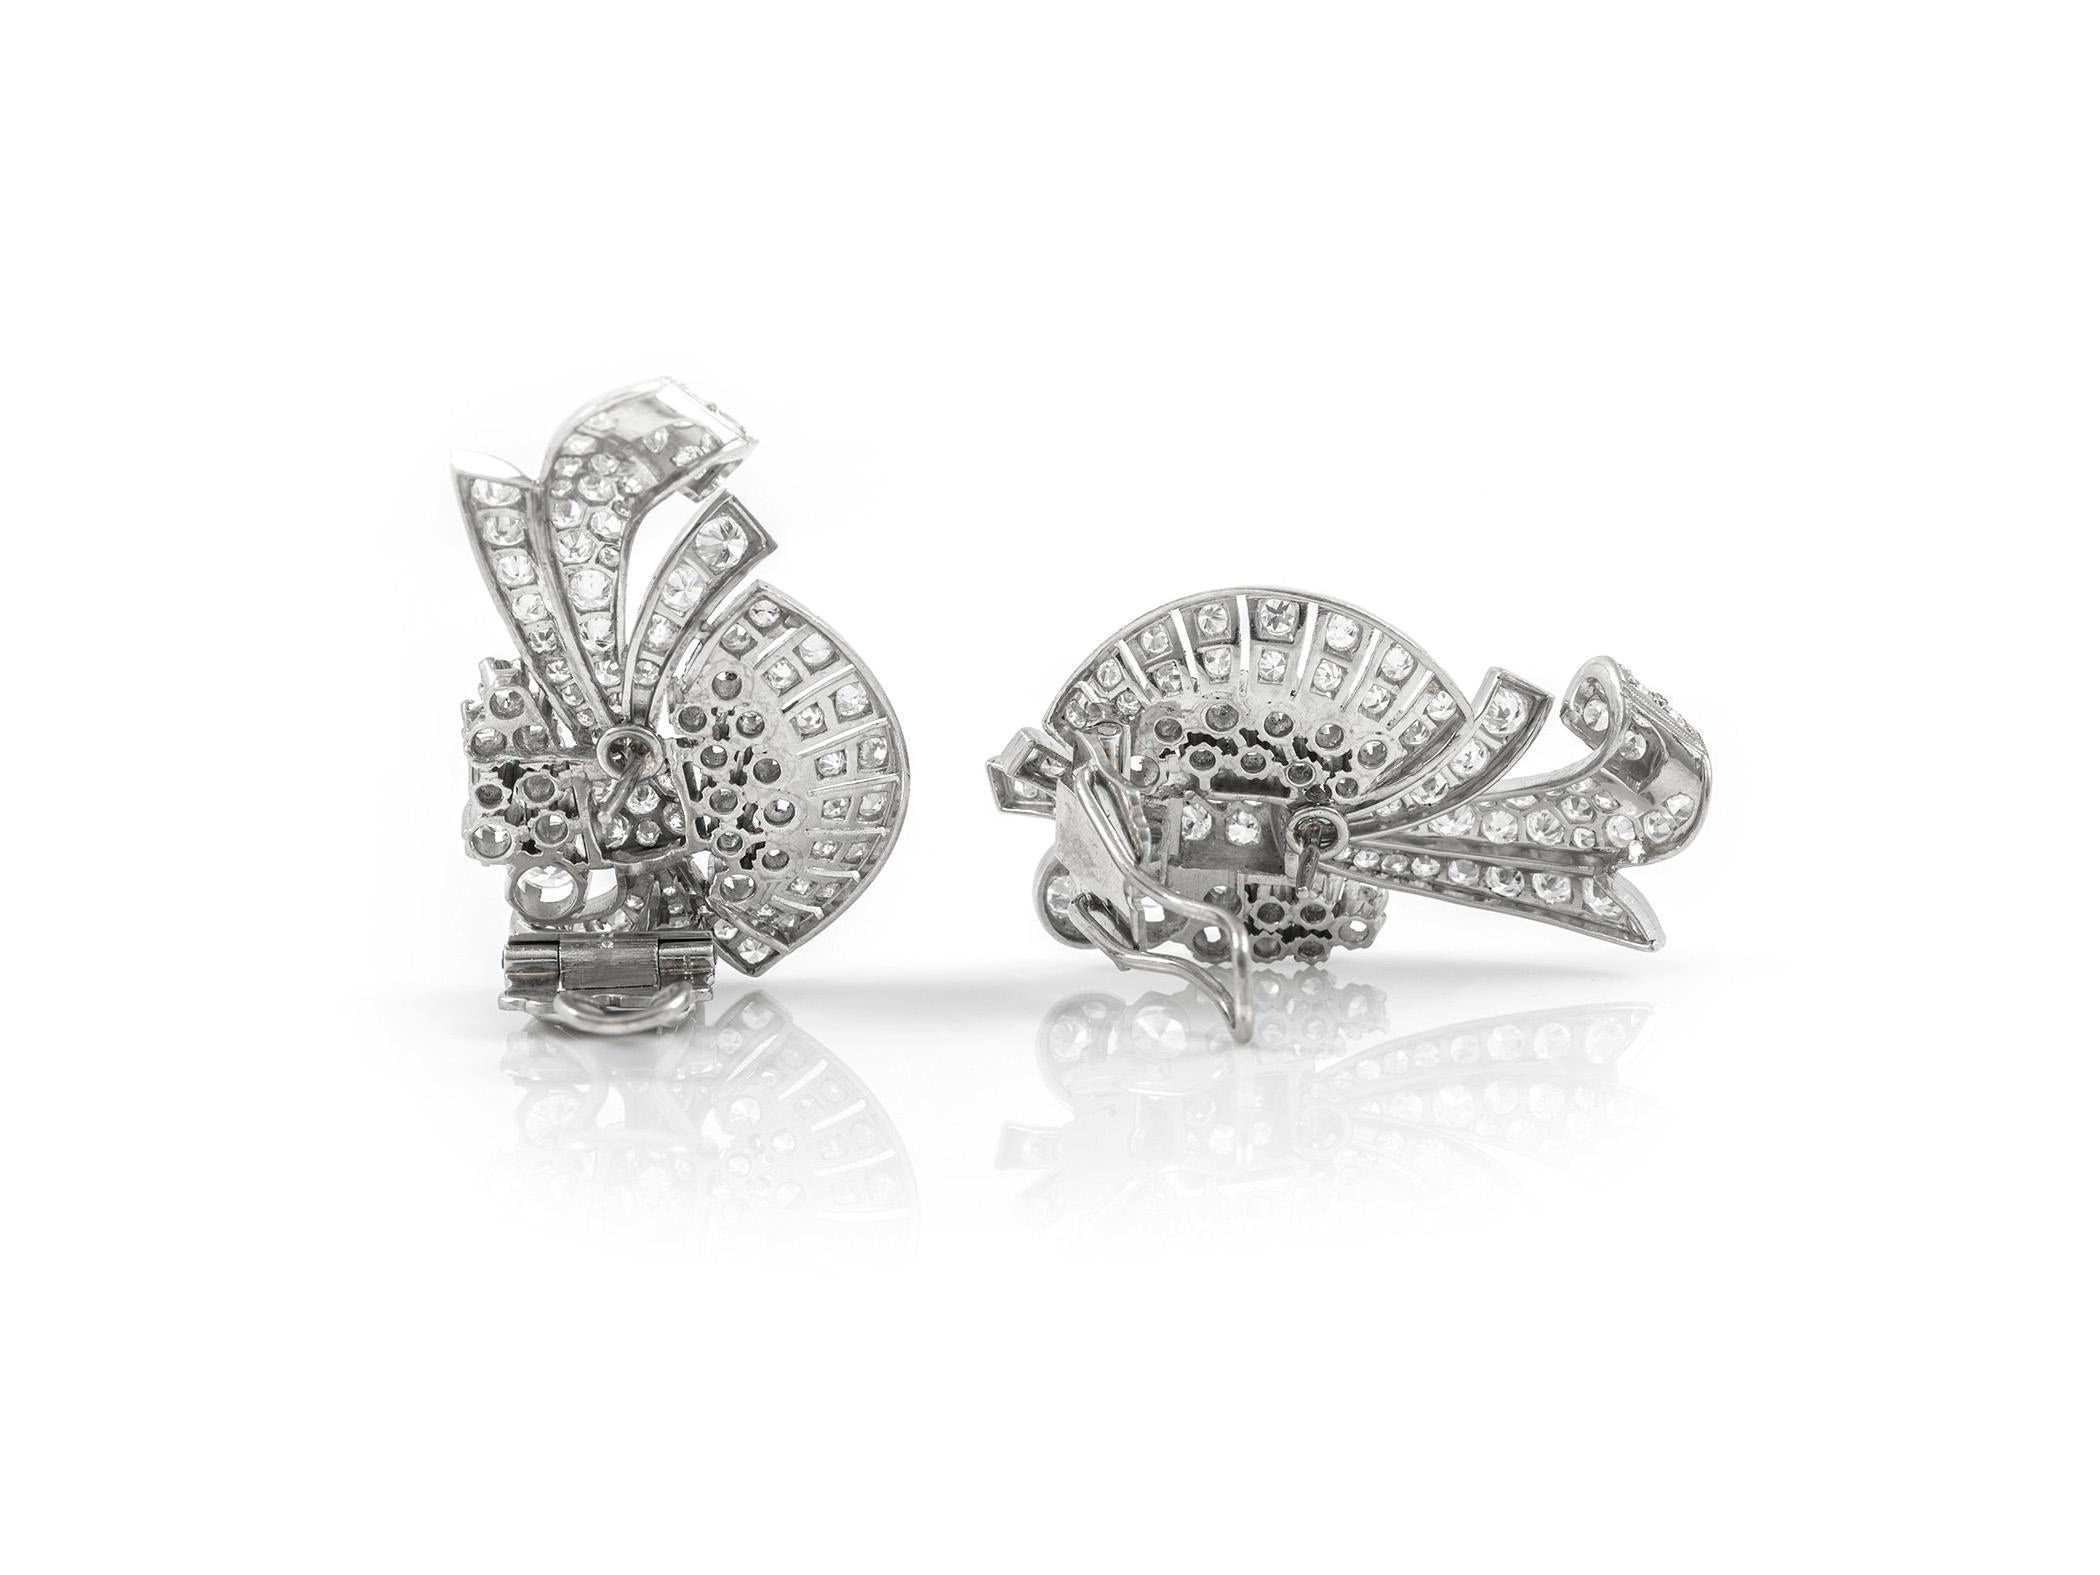 The earrings are finely crafted in platinum and weighing approximately total of 13.00 carat.
